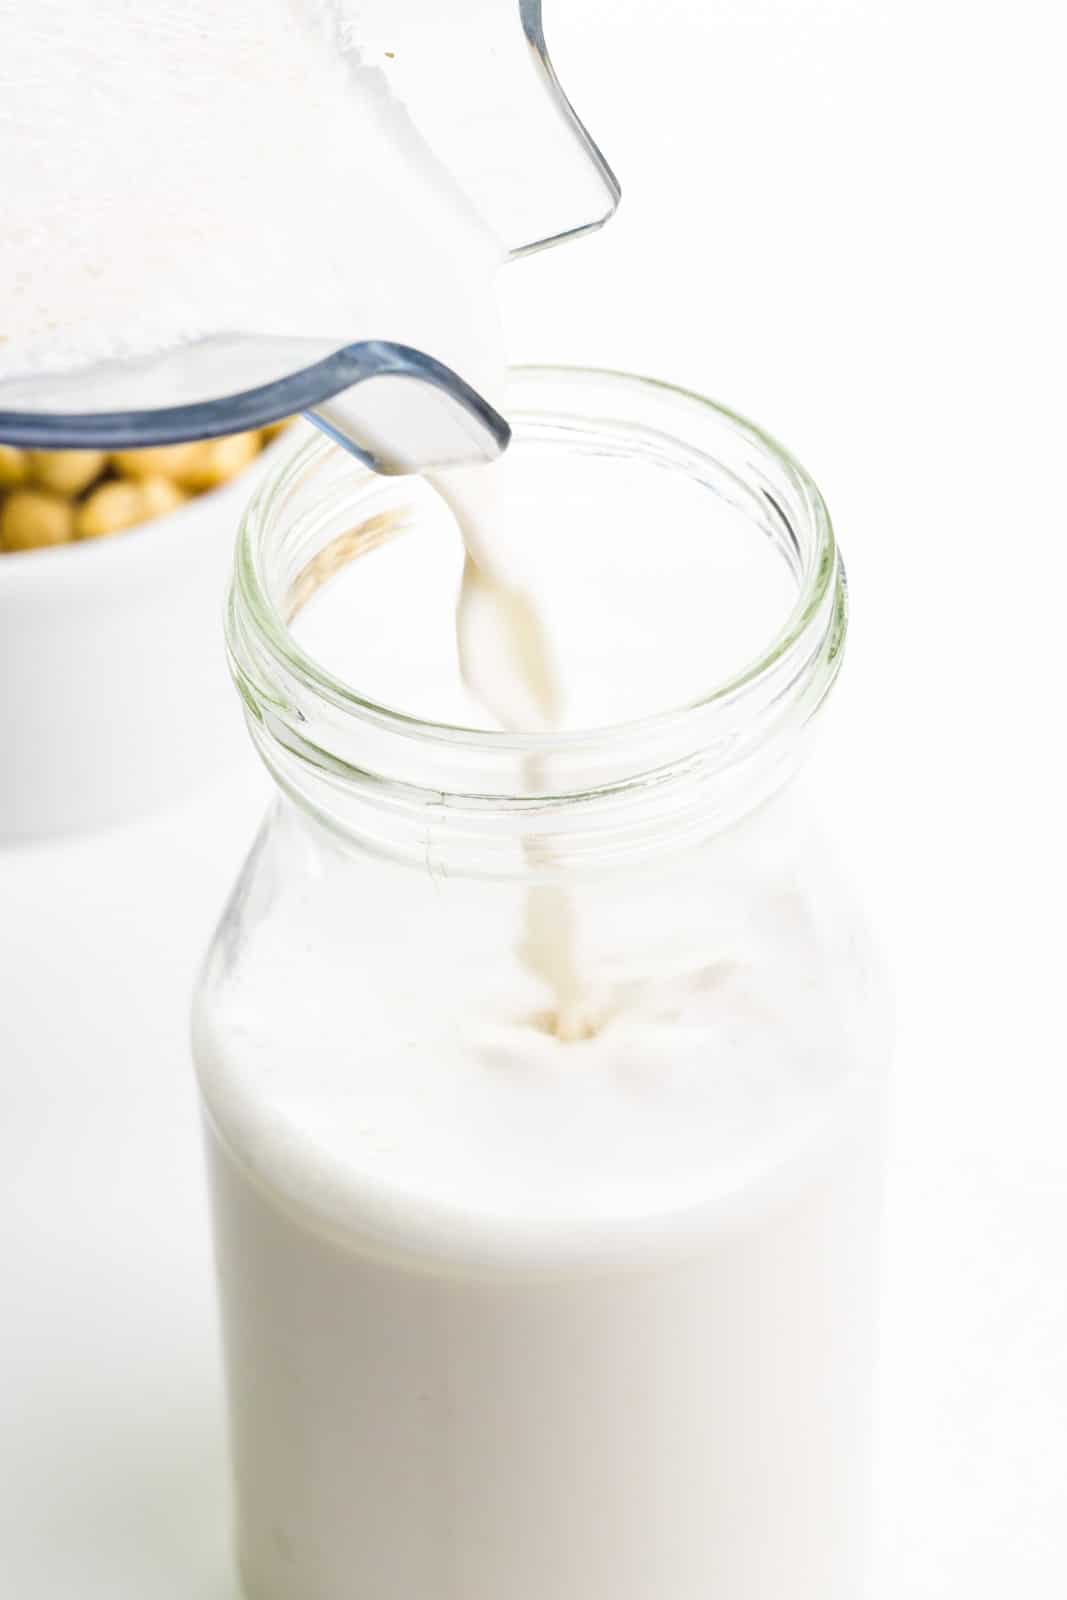 Cashew milk is being poured into a glass jar. There's a bowl of cashews behind it.